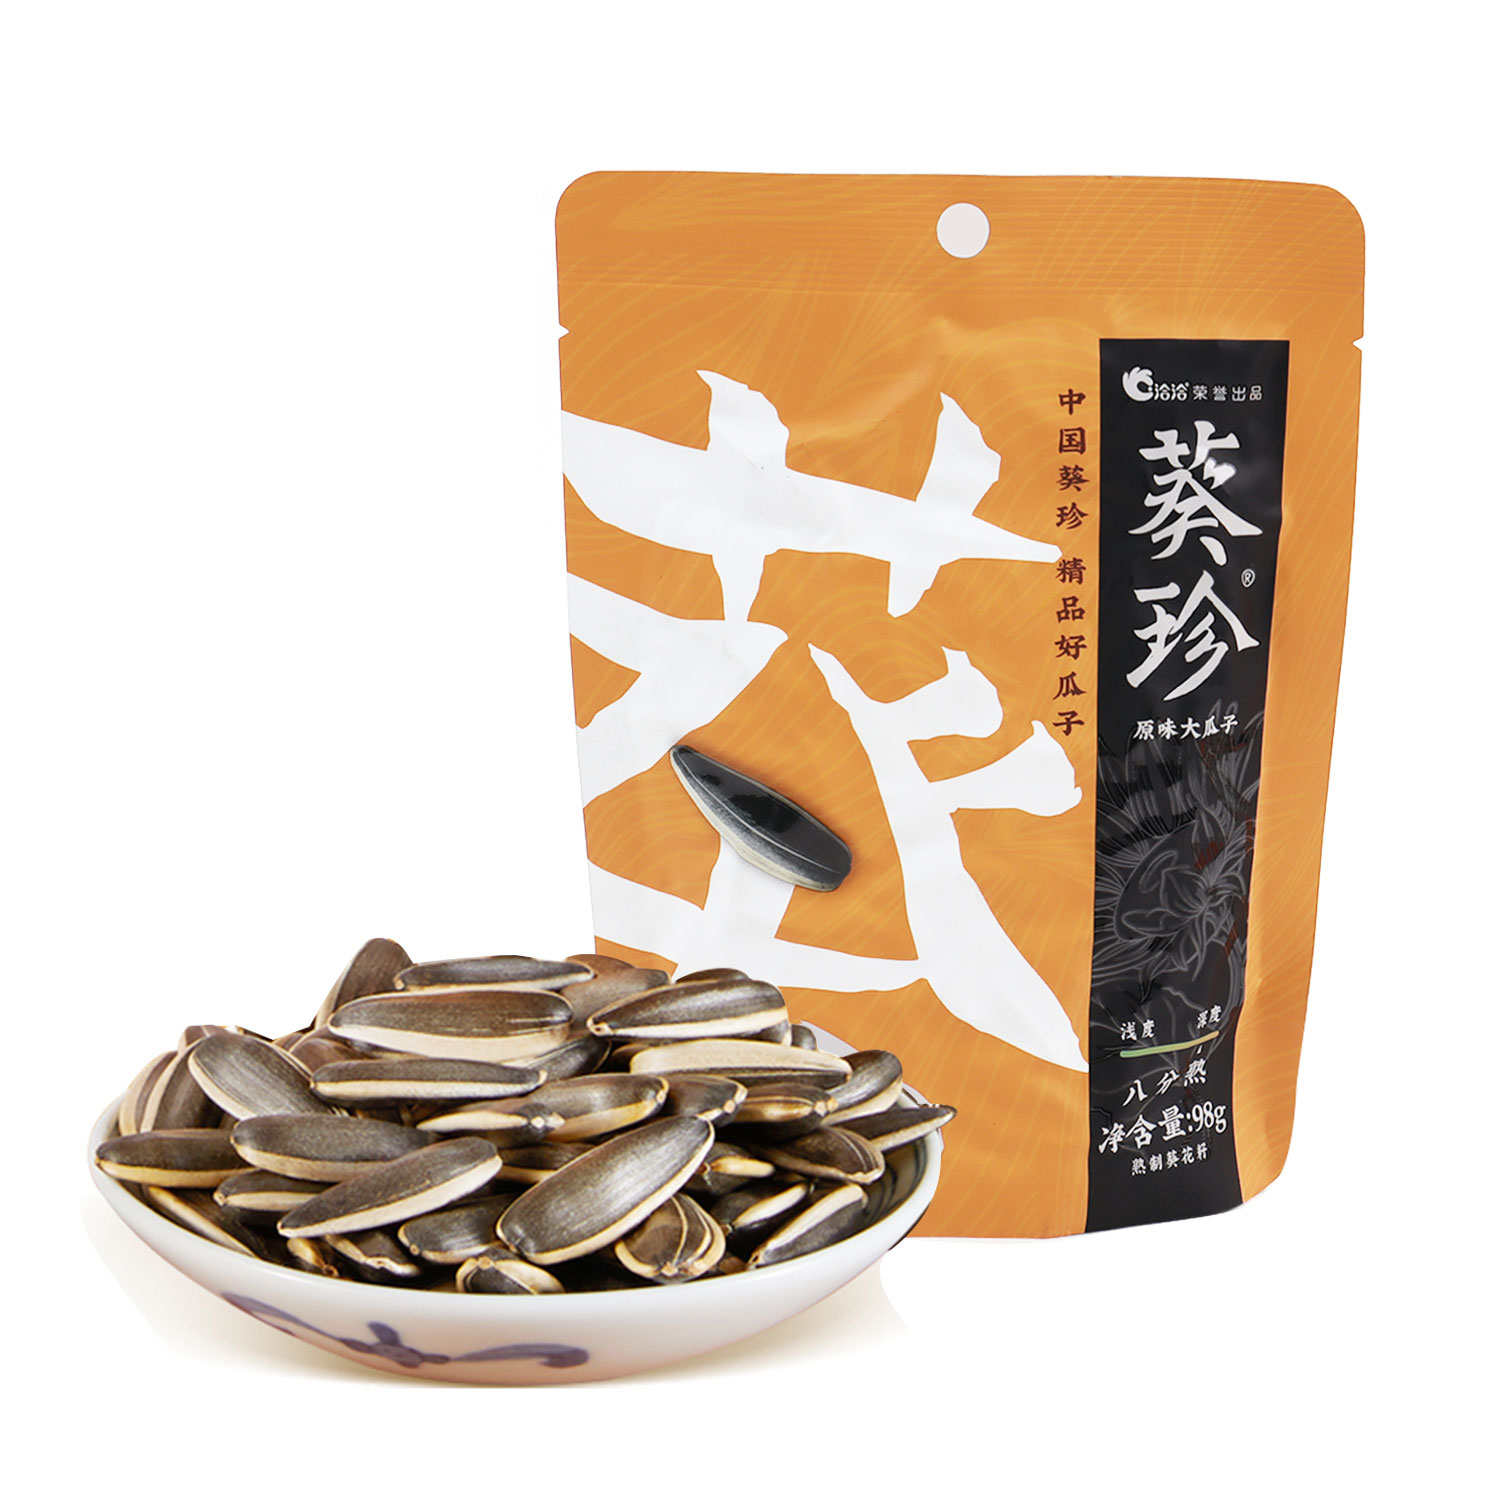 Chacha Kuizhen Quality Large Sunflower Seeds Original Flavor 98g-eBest-Nuts & Dried Fruit,Snacks & Confectionery